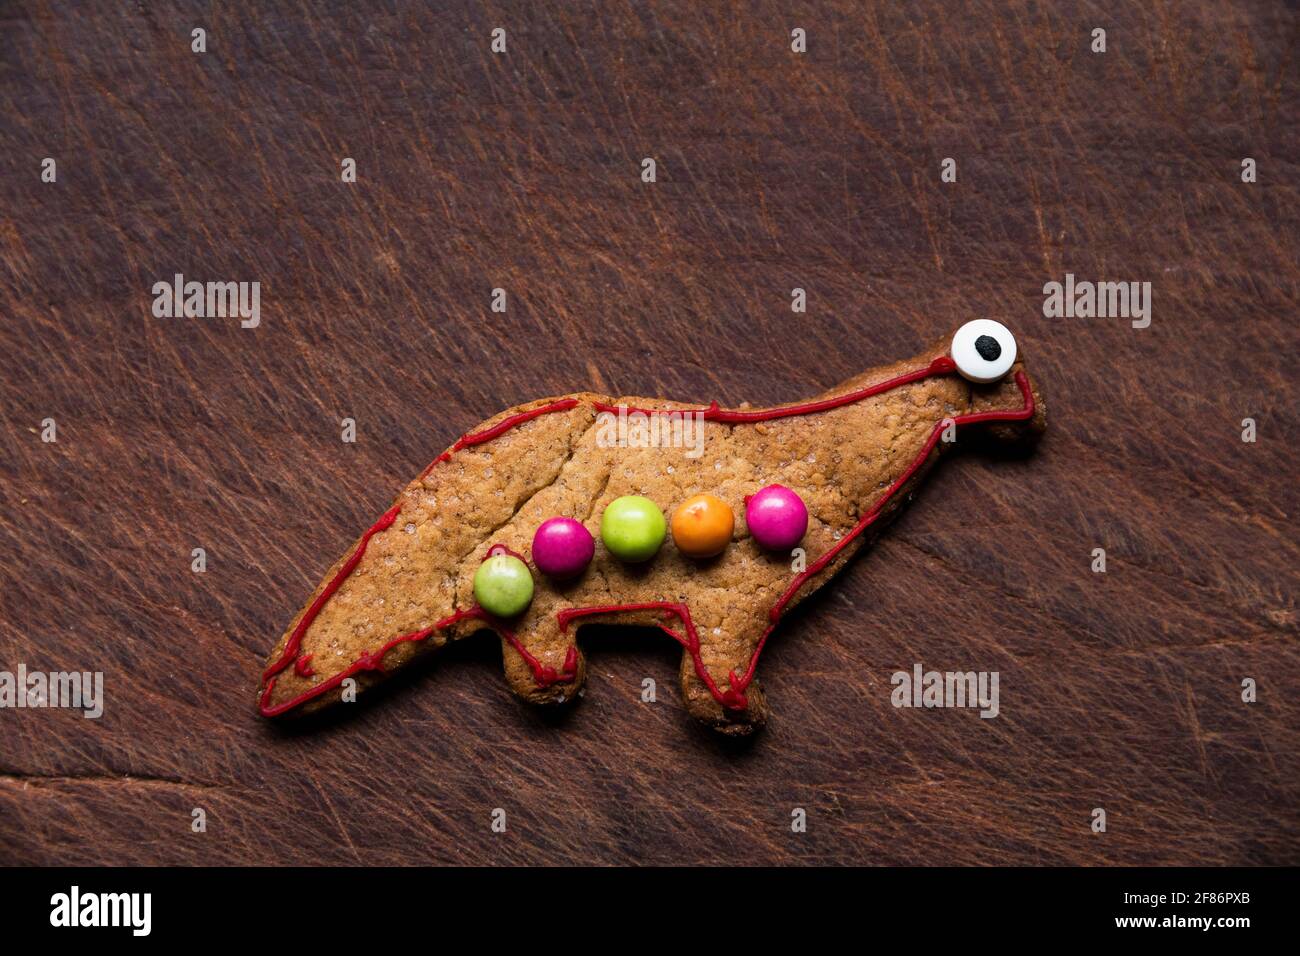 Cute decorated dinosaur gingerbread cookie Stock Photo